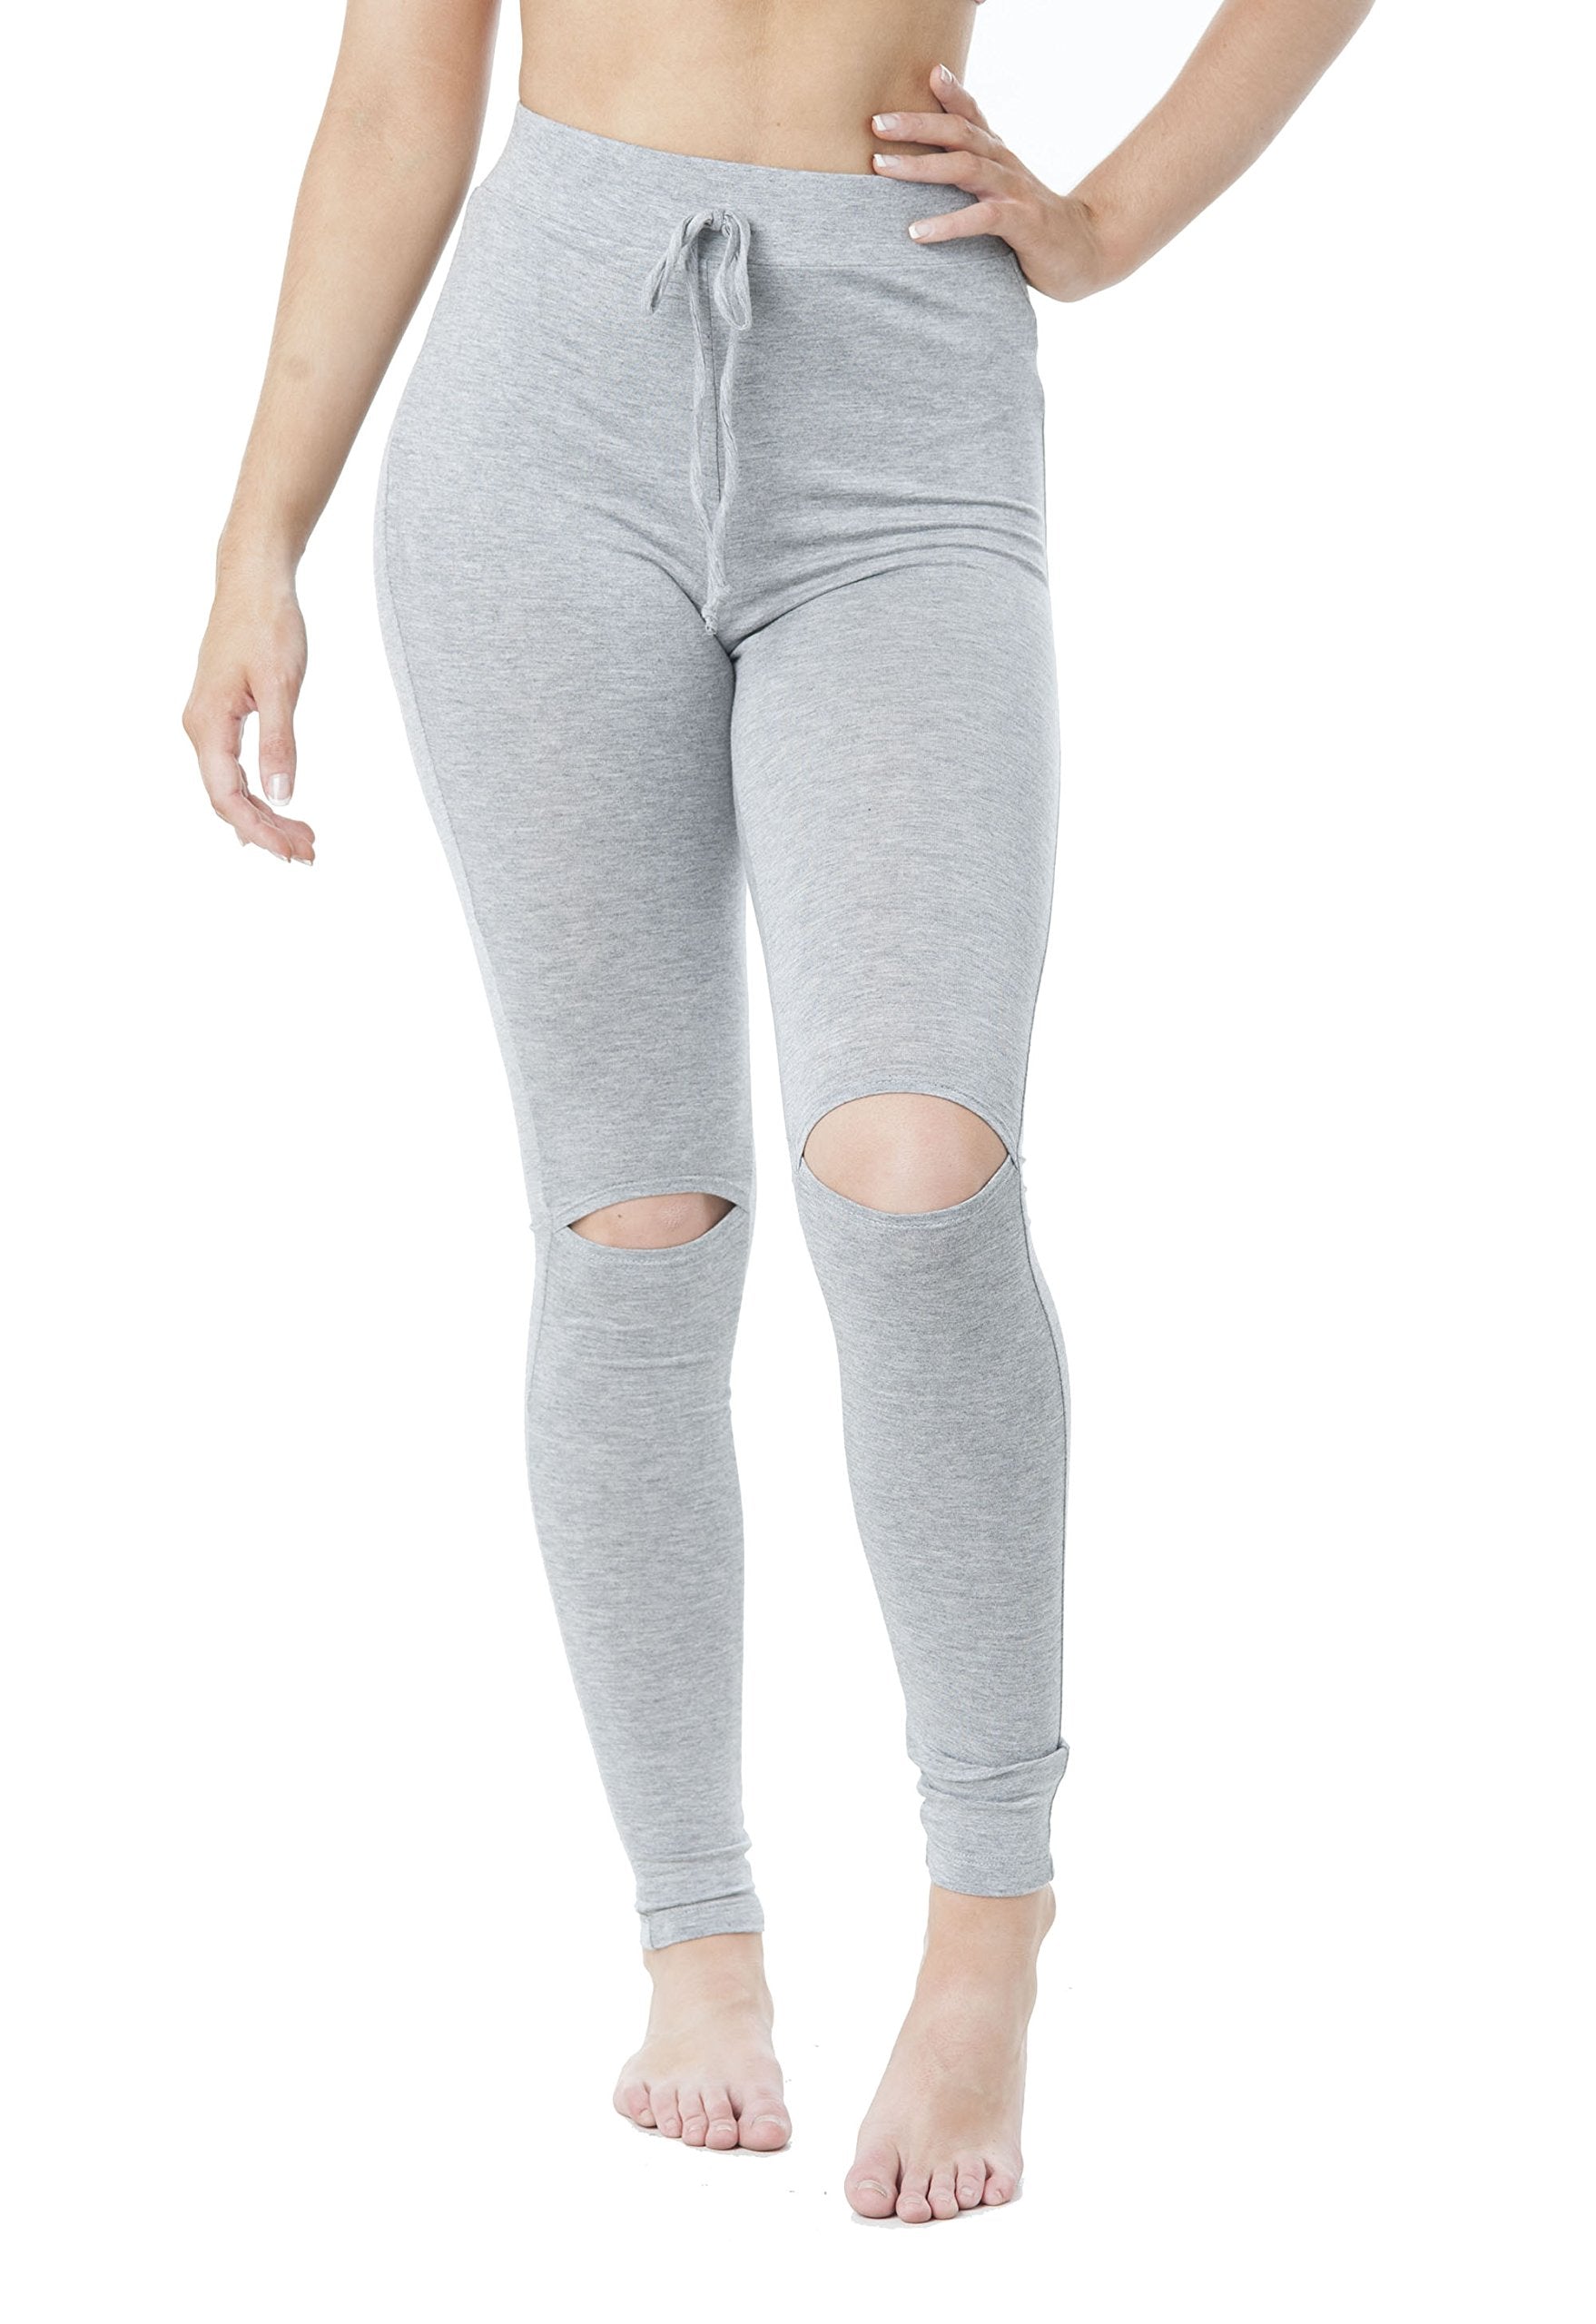 Drawstring Spandex Stretchy Fitted Long Pants Leggings